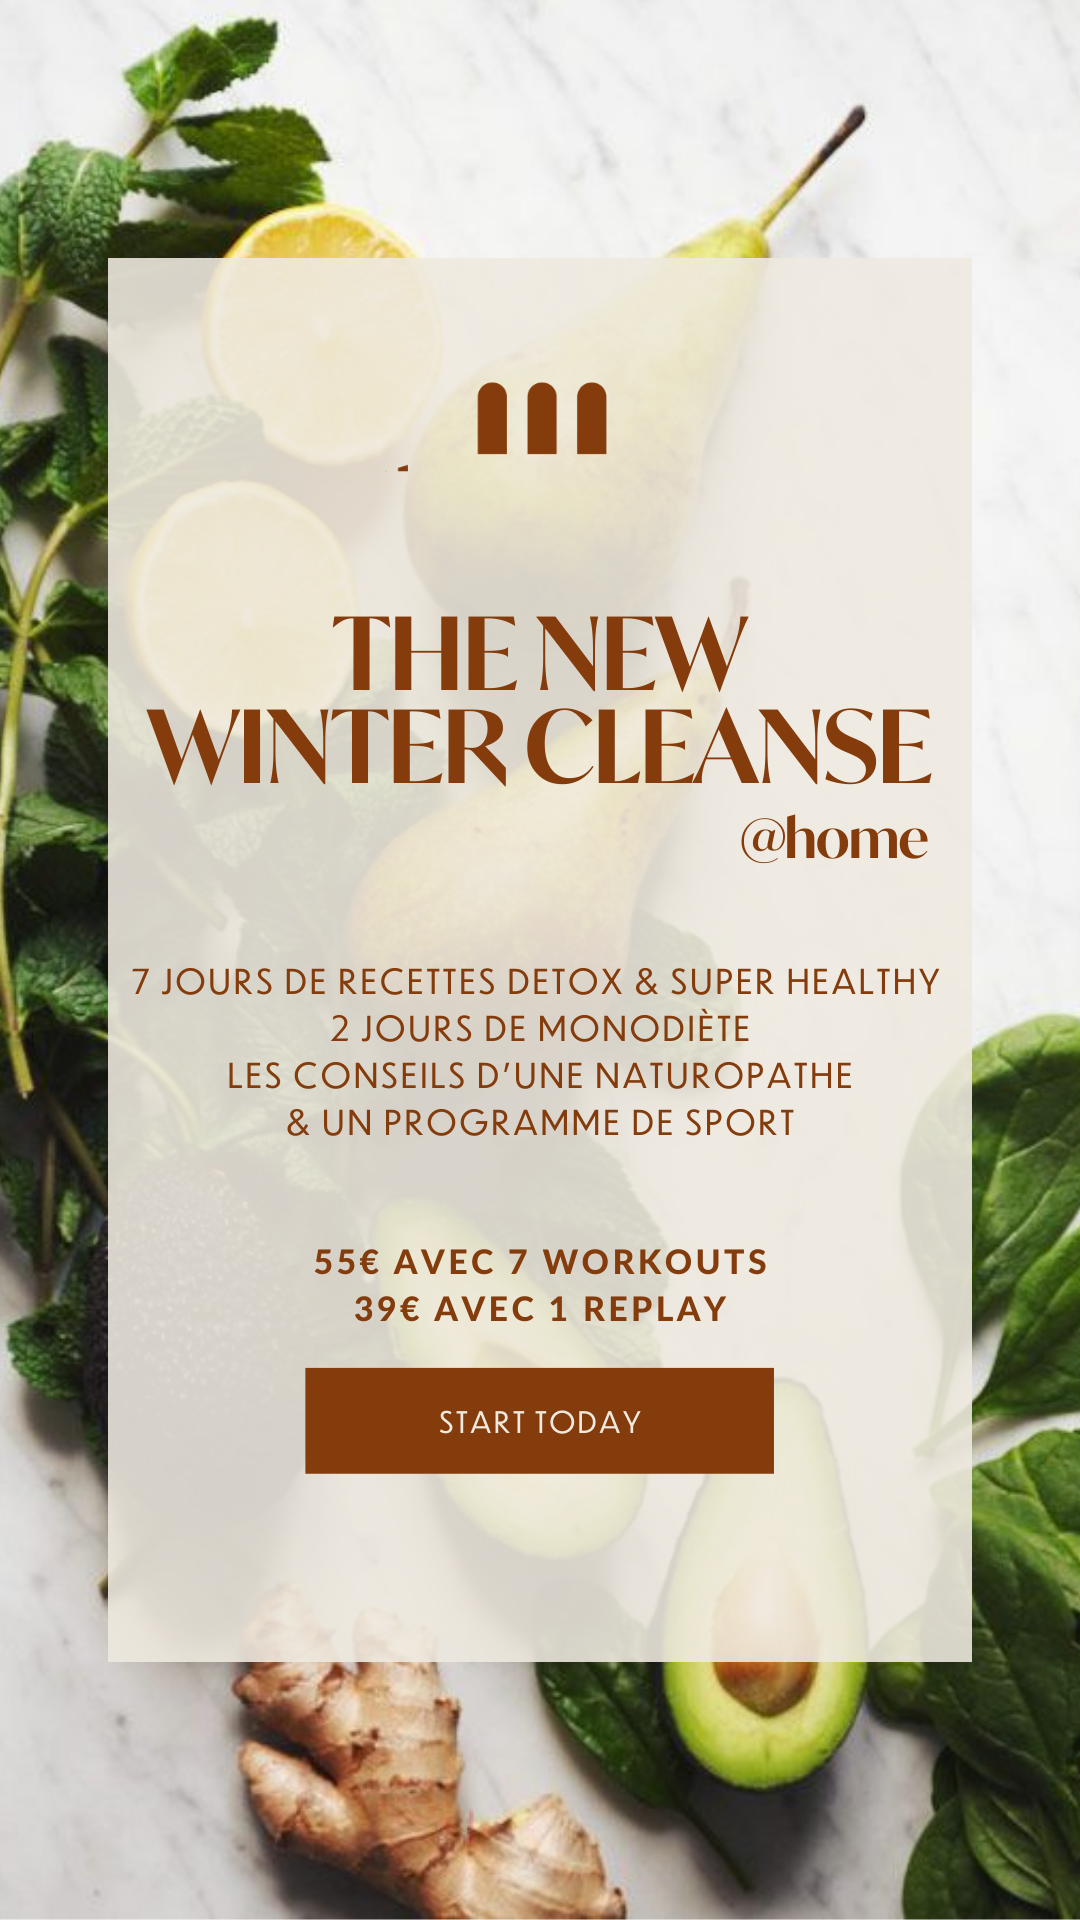 THE NEW WINTER CLEANSE